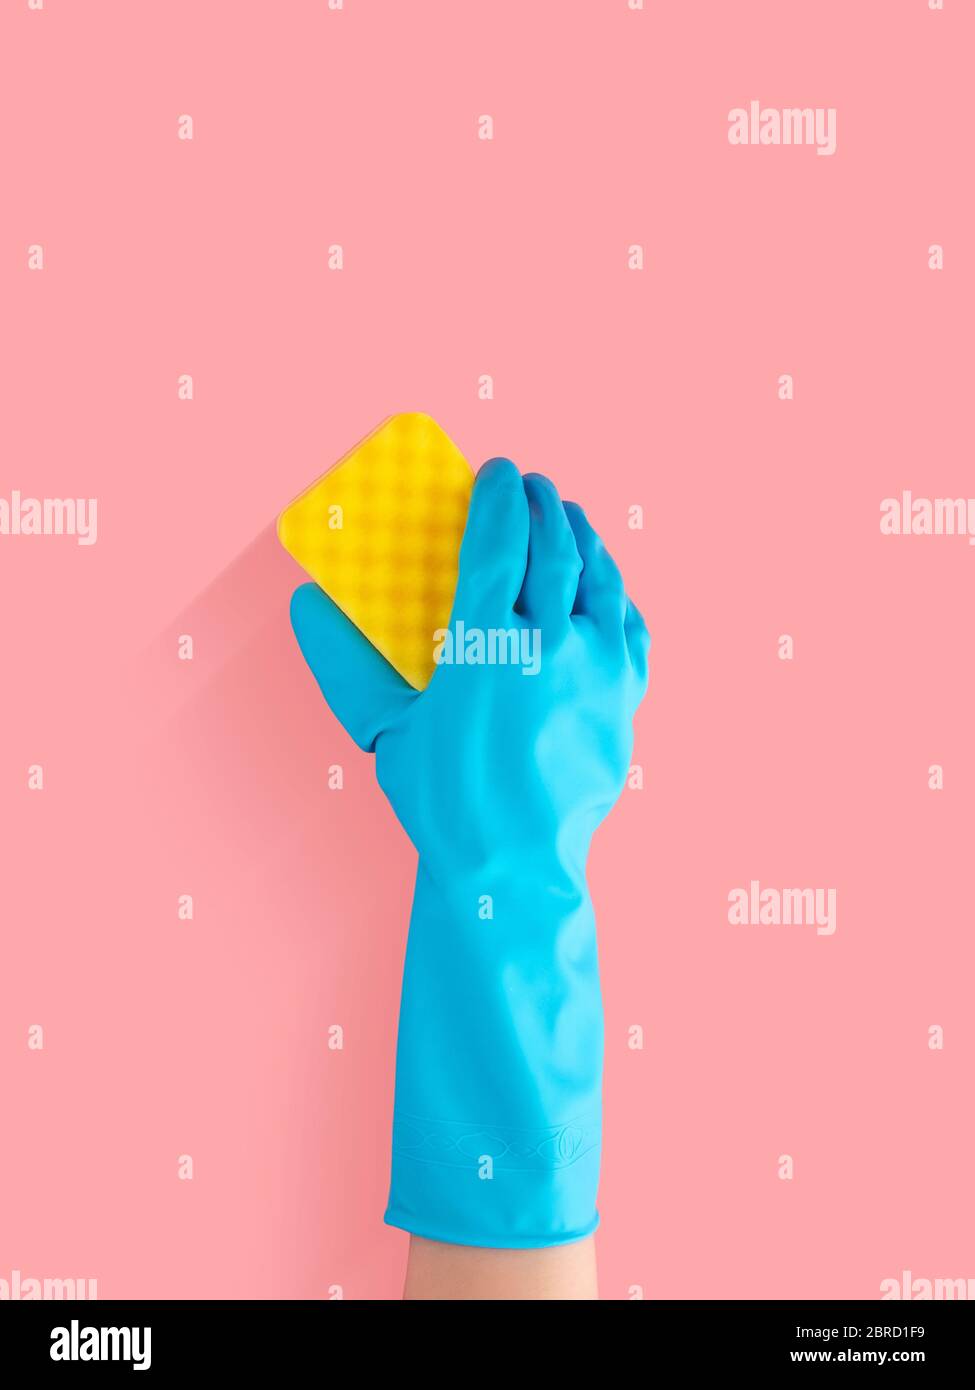 hand in blue rubber glove holding yellow cleaning sponge, cleaning and disinfection for good hygiene isolated on pink background with copy space Stock Photo